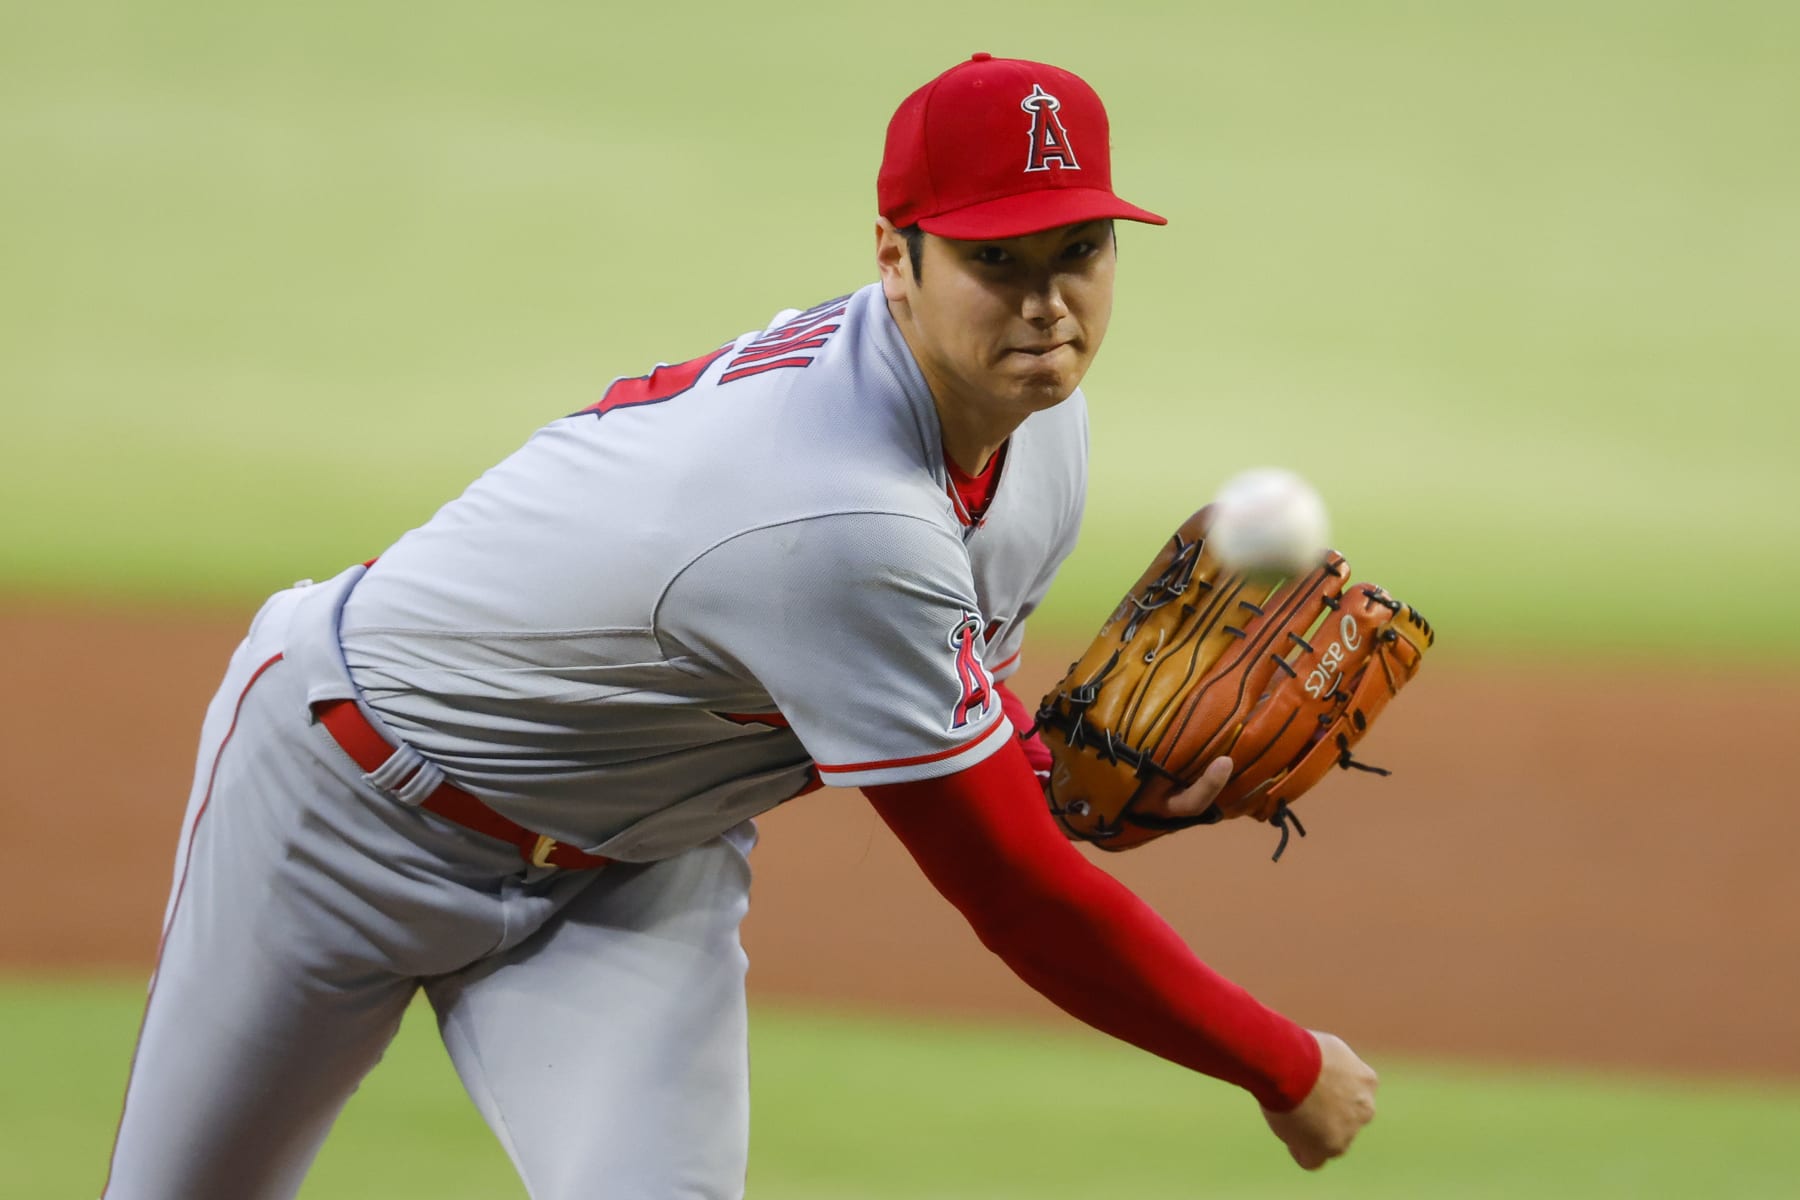 How will the Angels handle Ohtani's potential extension?